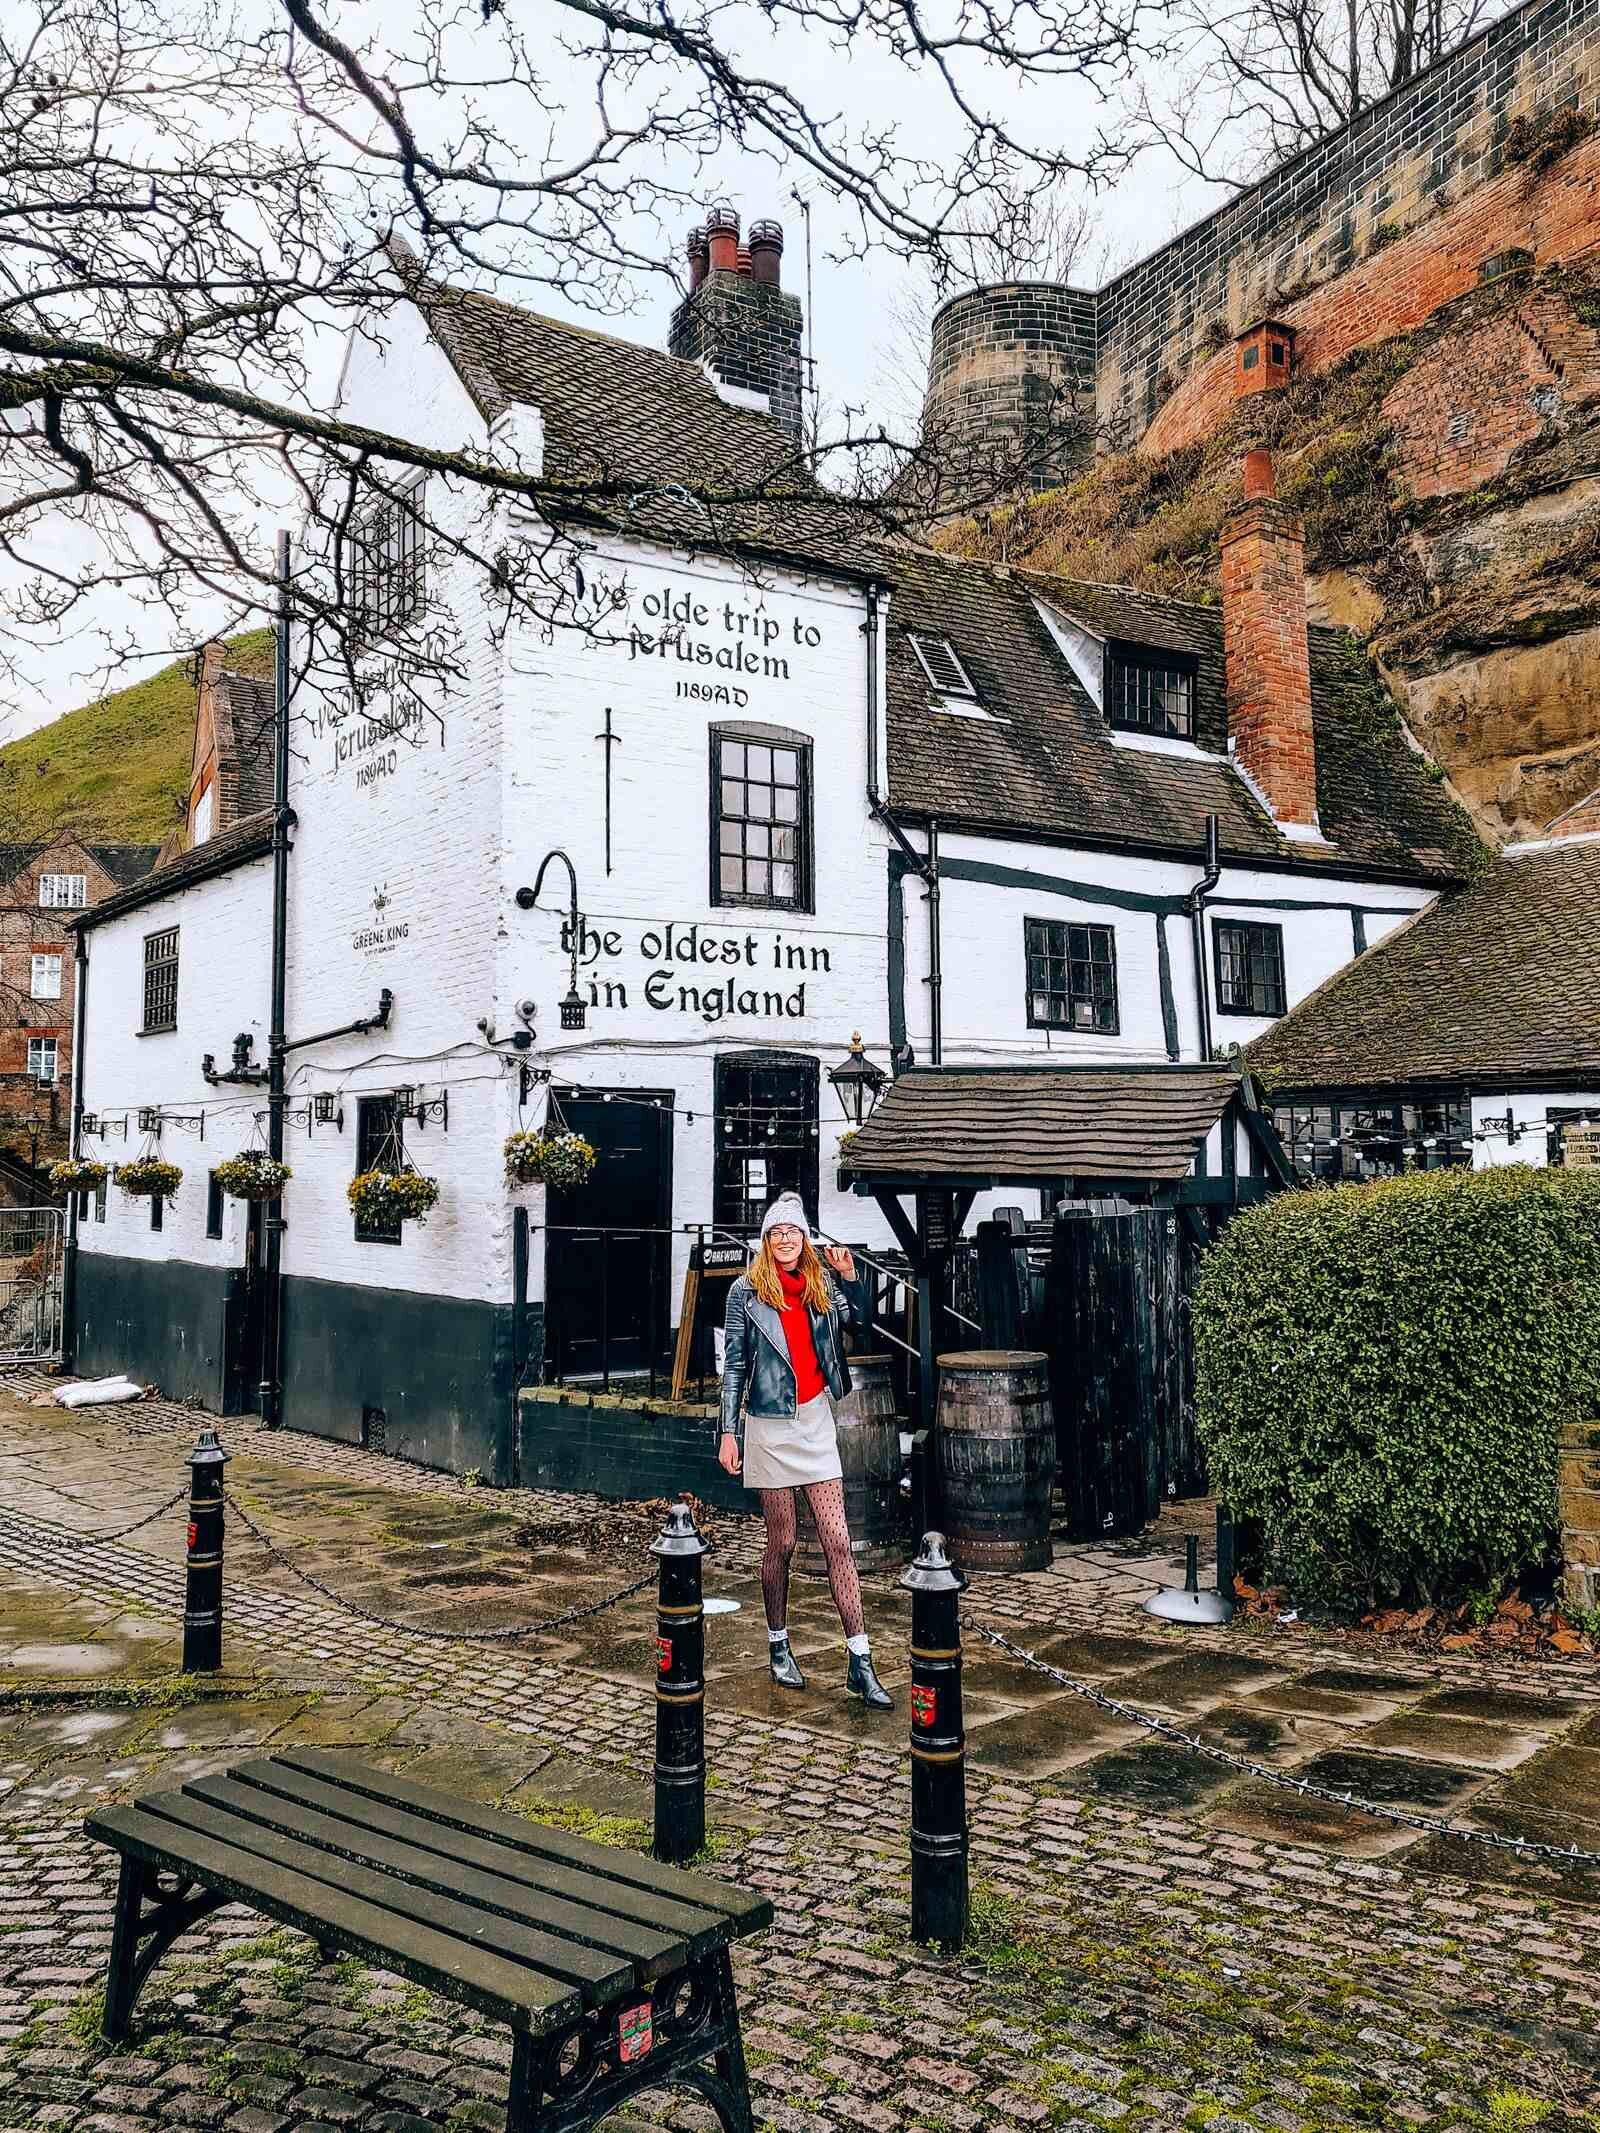 The Oldest Pub in the UK